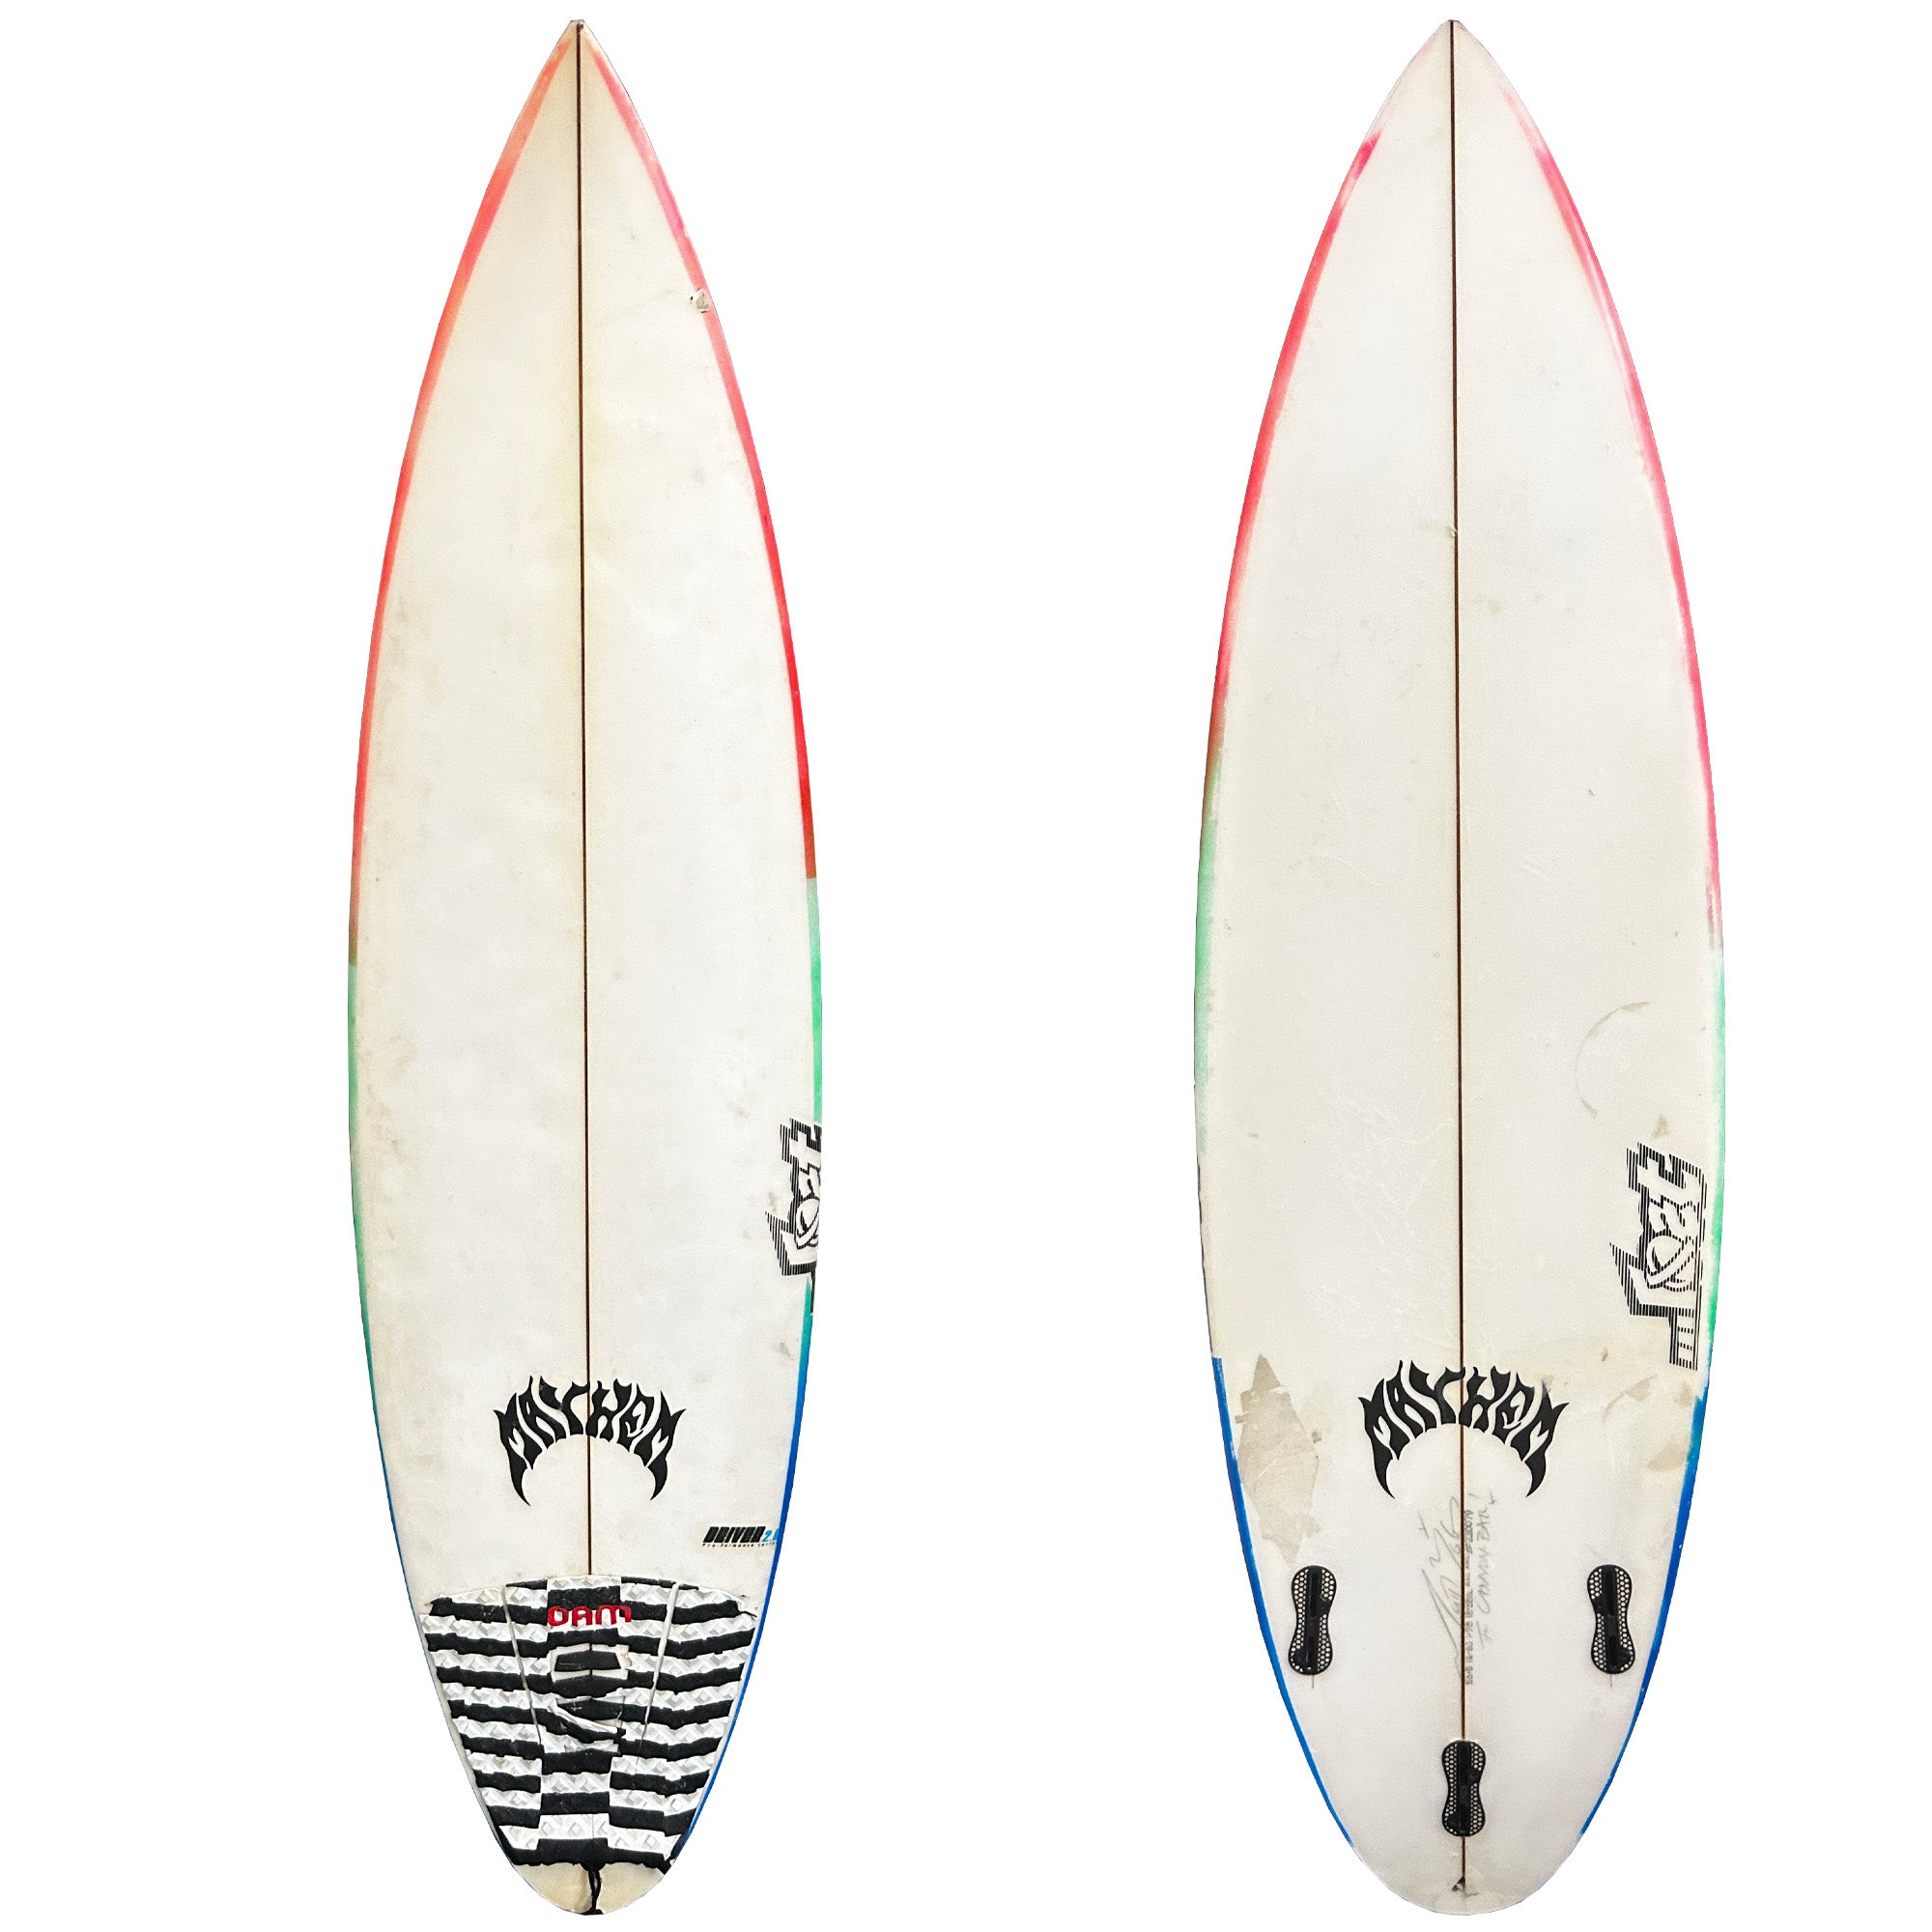 Lost Driver 2.0 5'3 1/2 Consignment Surfboard